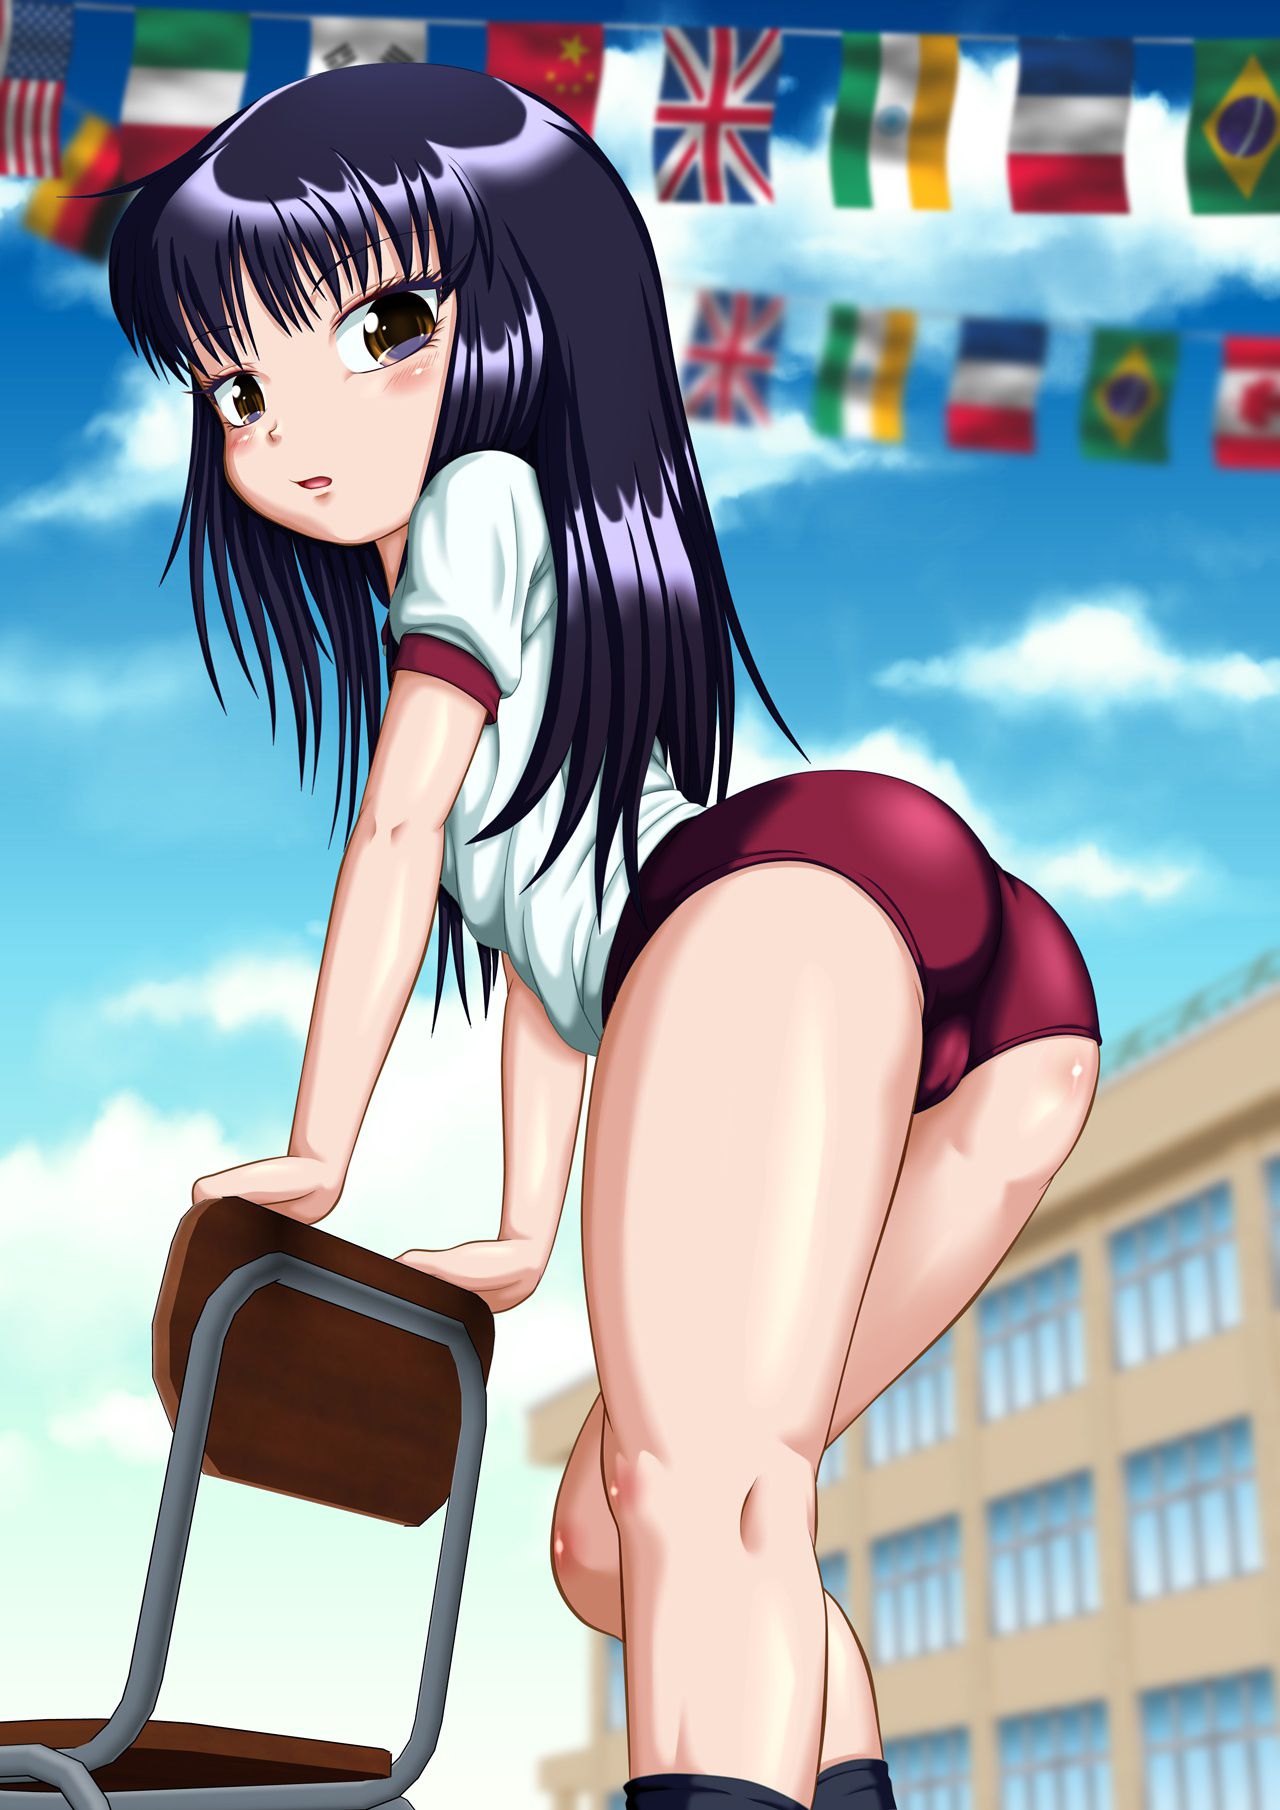 [Loliburma] Easy to spend the summer bloomers, Rolibrumaero image want to lick the sweat of a cheerful girl in gym clothes! 37